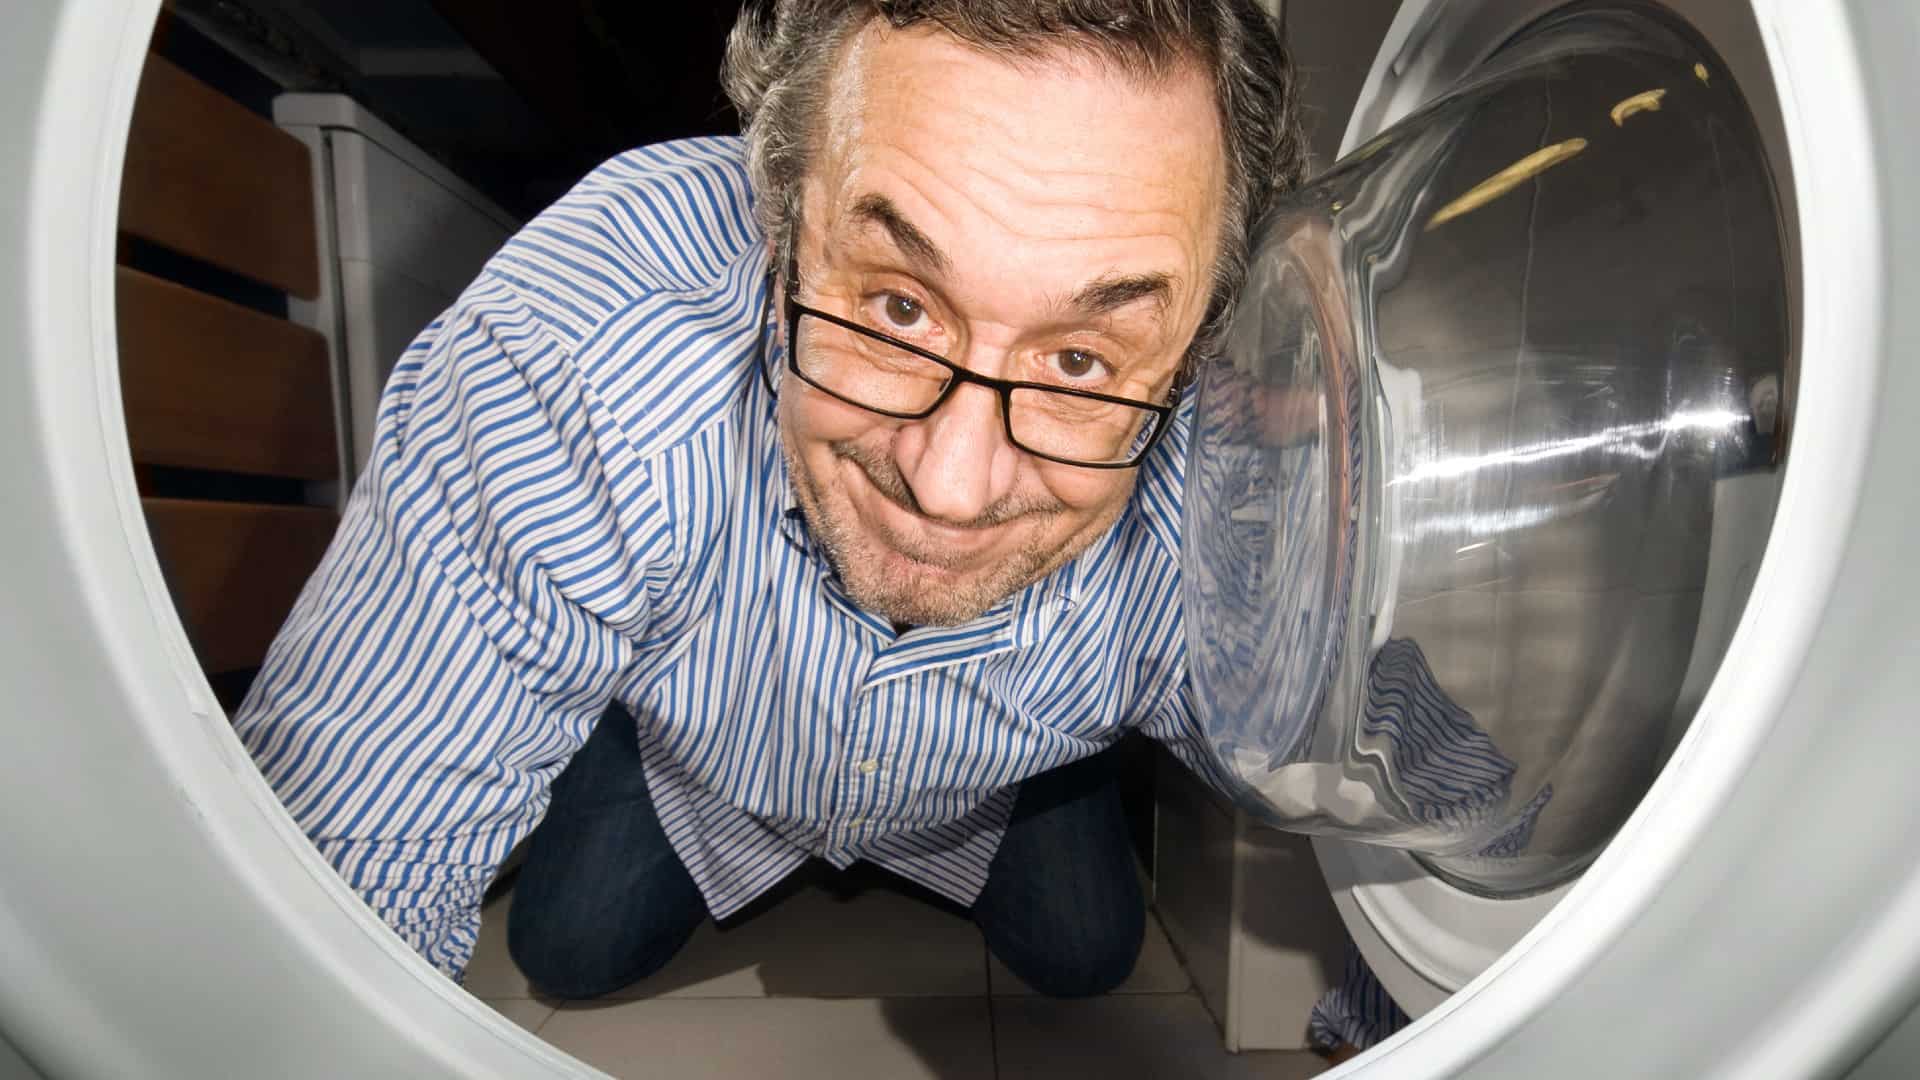 A close up of a dodgy man's face as taken from inside a washing machine as he looks in the machine with a sly grin on his face and holds the door open with one hand.